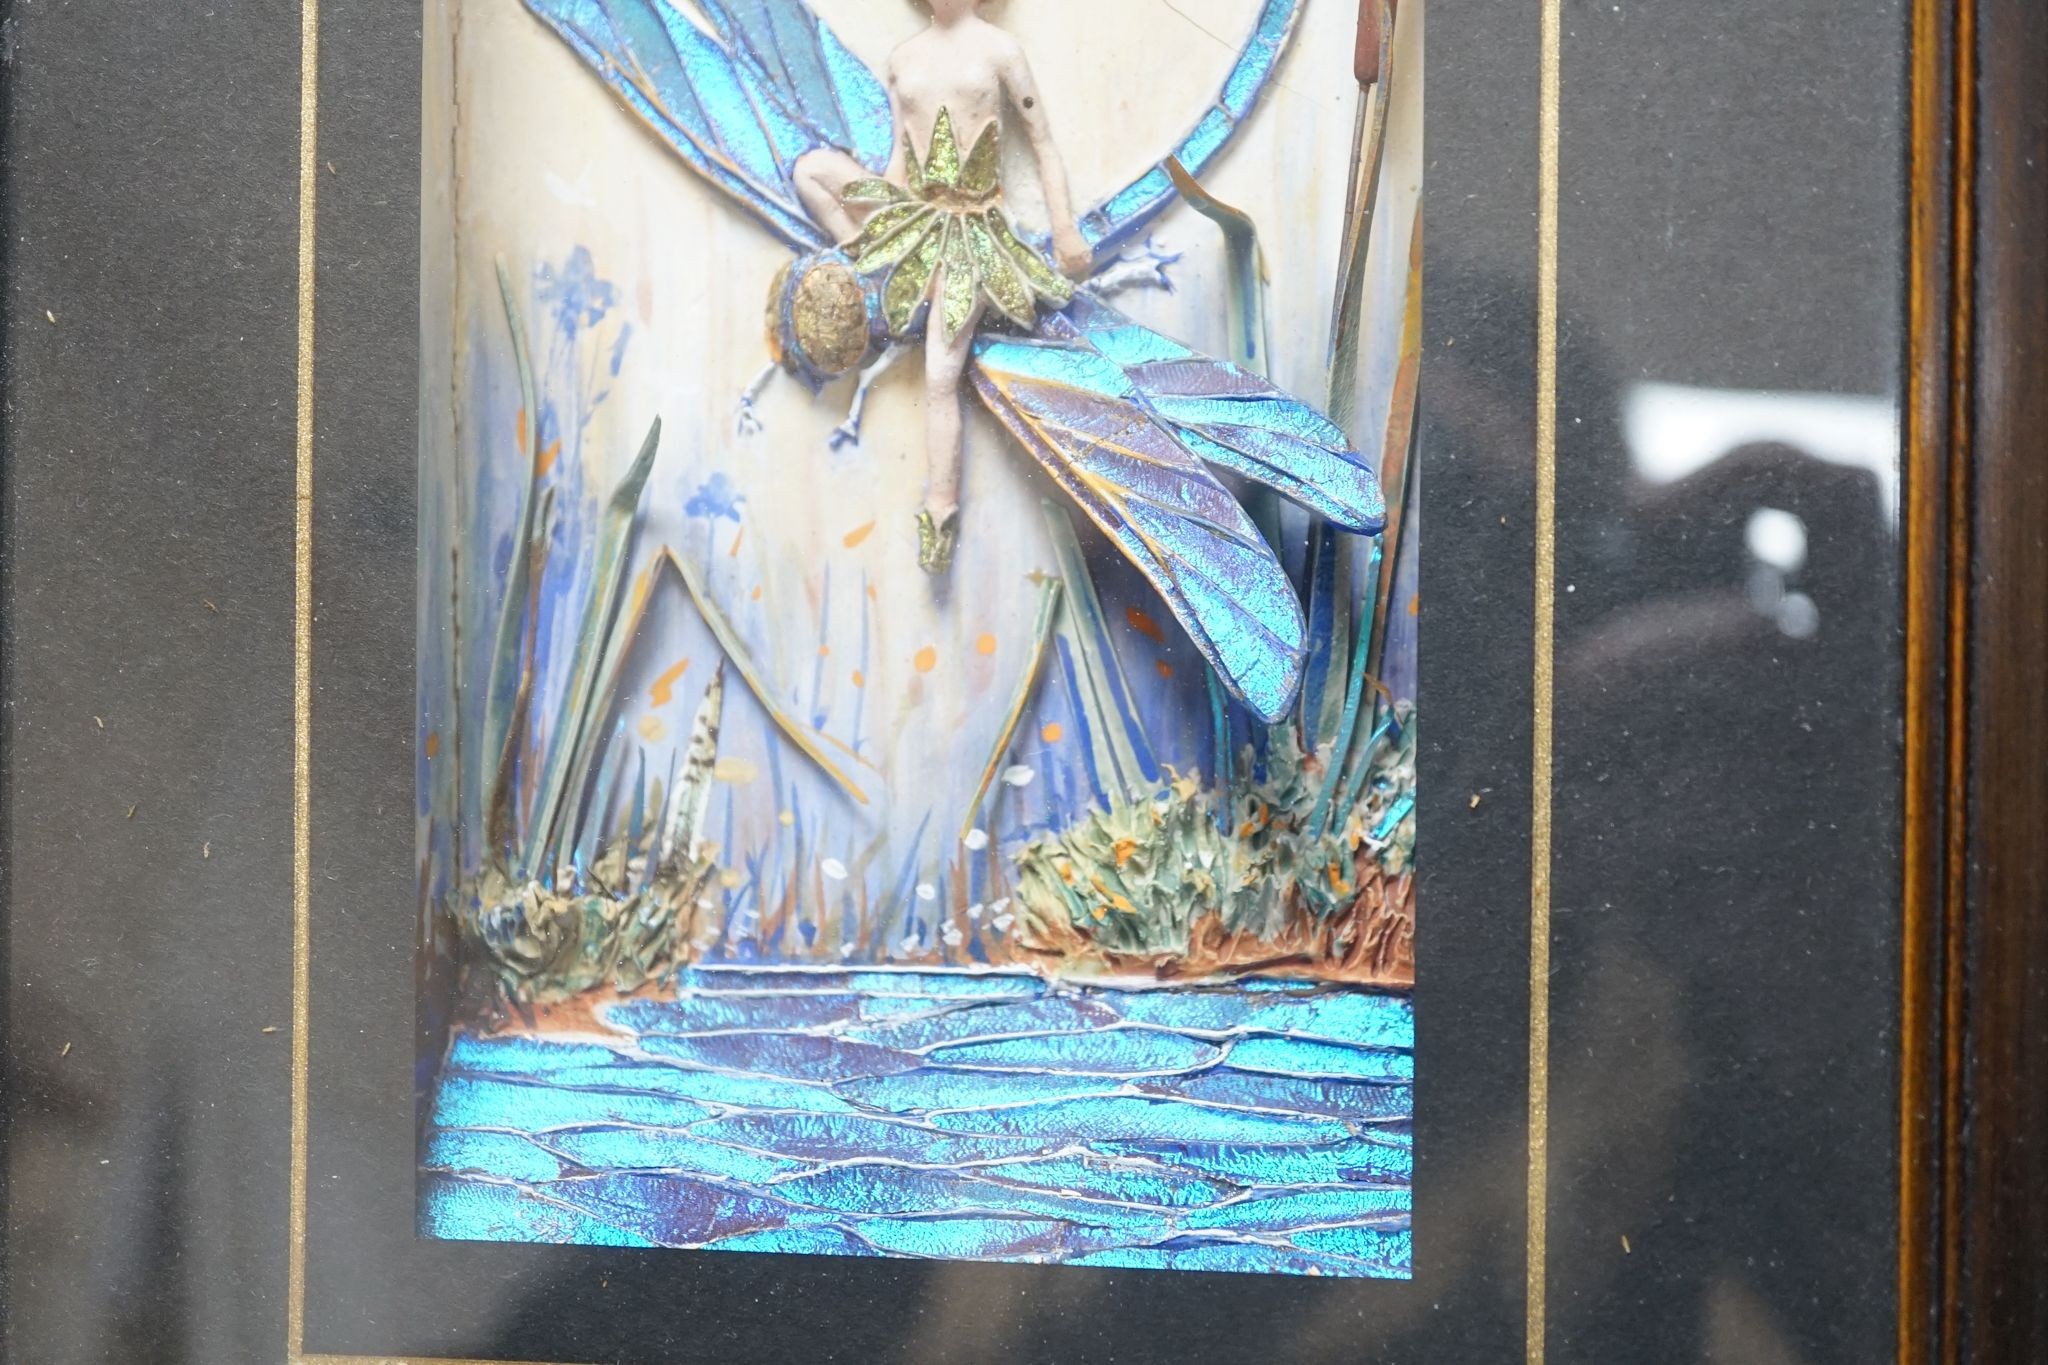 A pair of morpho butterfly wing nymph diorama, signed Gaydon King, Pat. App. For 19907/29, c. - Image 5 of 7